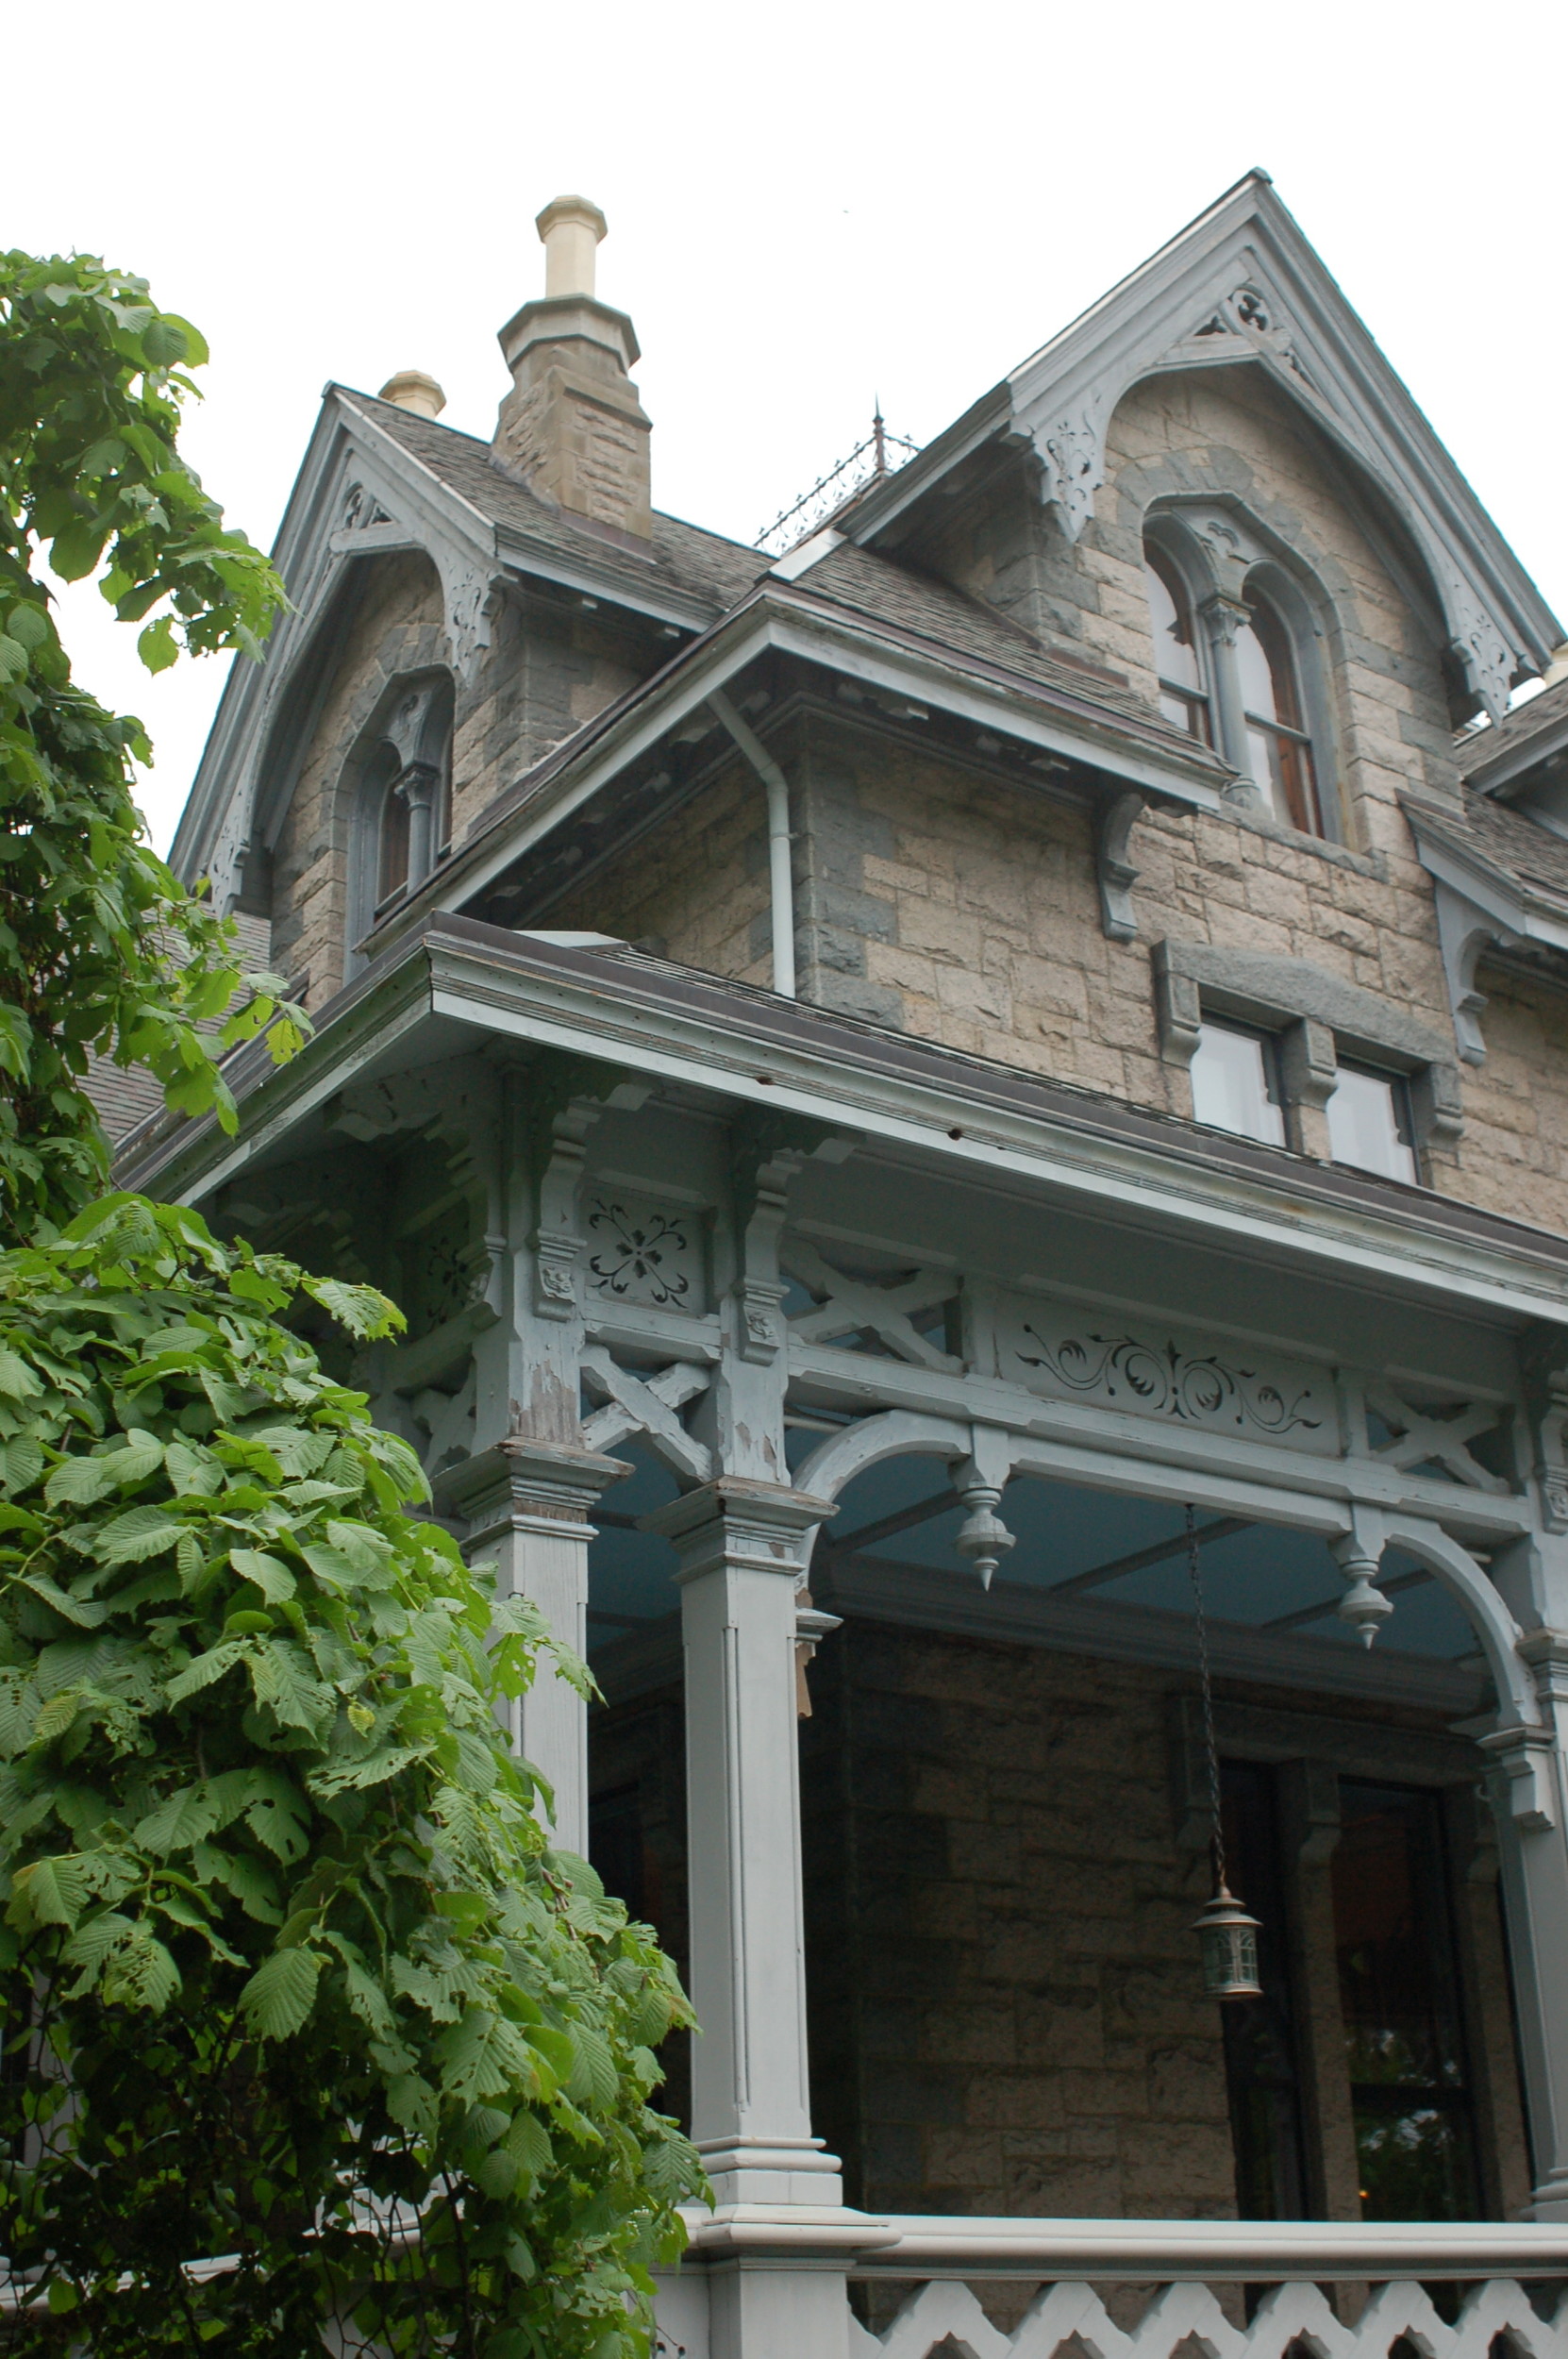 Clouds Hill in Warwick features beautiful Victorian-era architectural details inside and out.